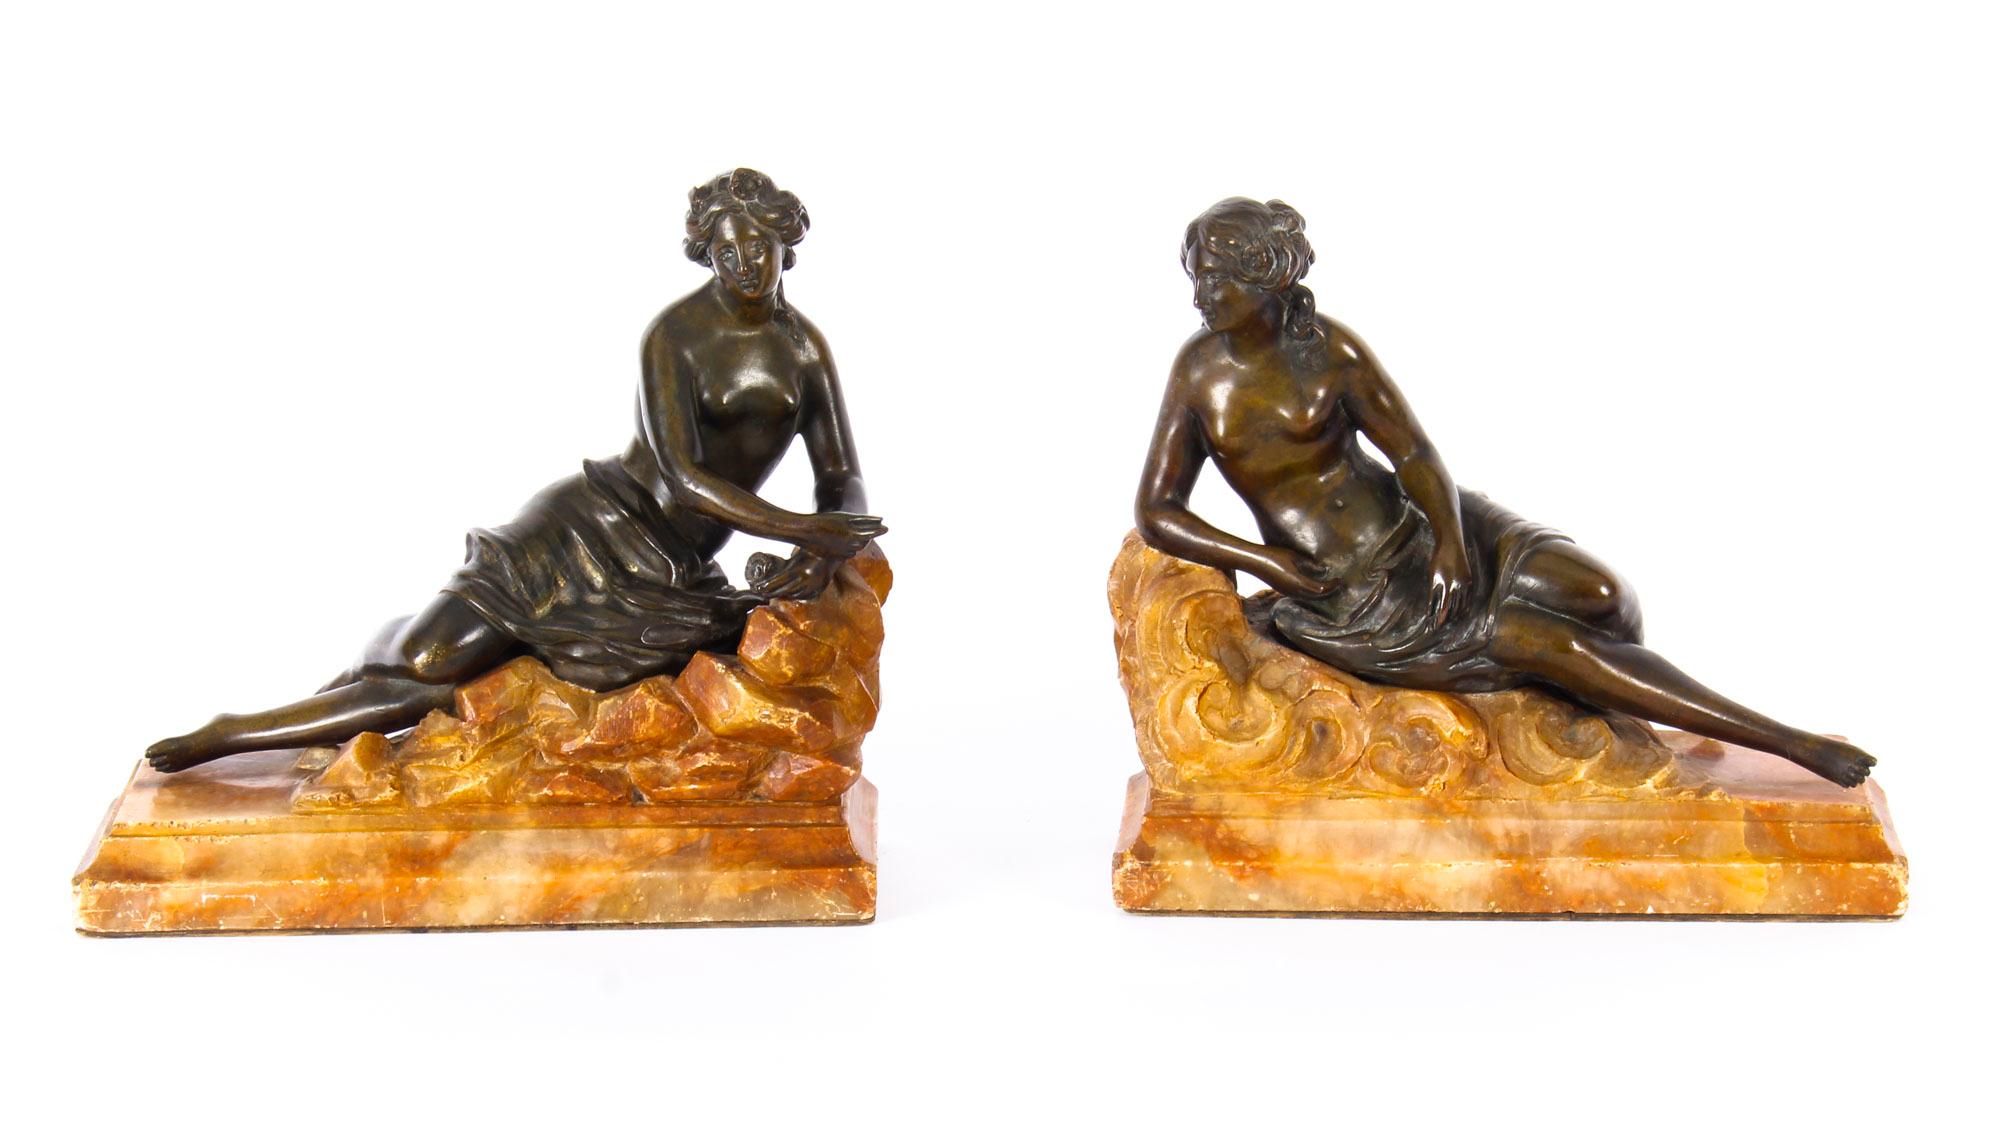 This is a stunning antique pair of patinated bronze reclining Classical semi-nude sculptures of young ladies mounted on carved marble bases, circa 1880 in date.

These exceptionally sculptured bronze figures feature two beautiful youthful women